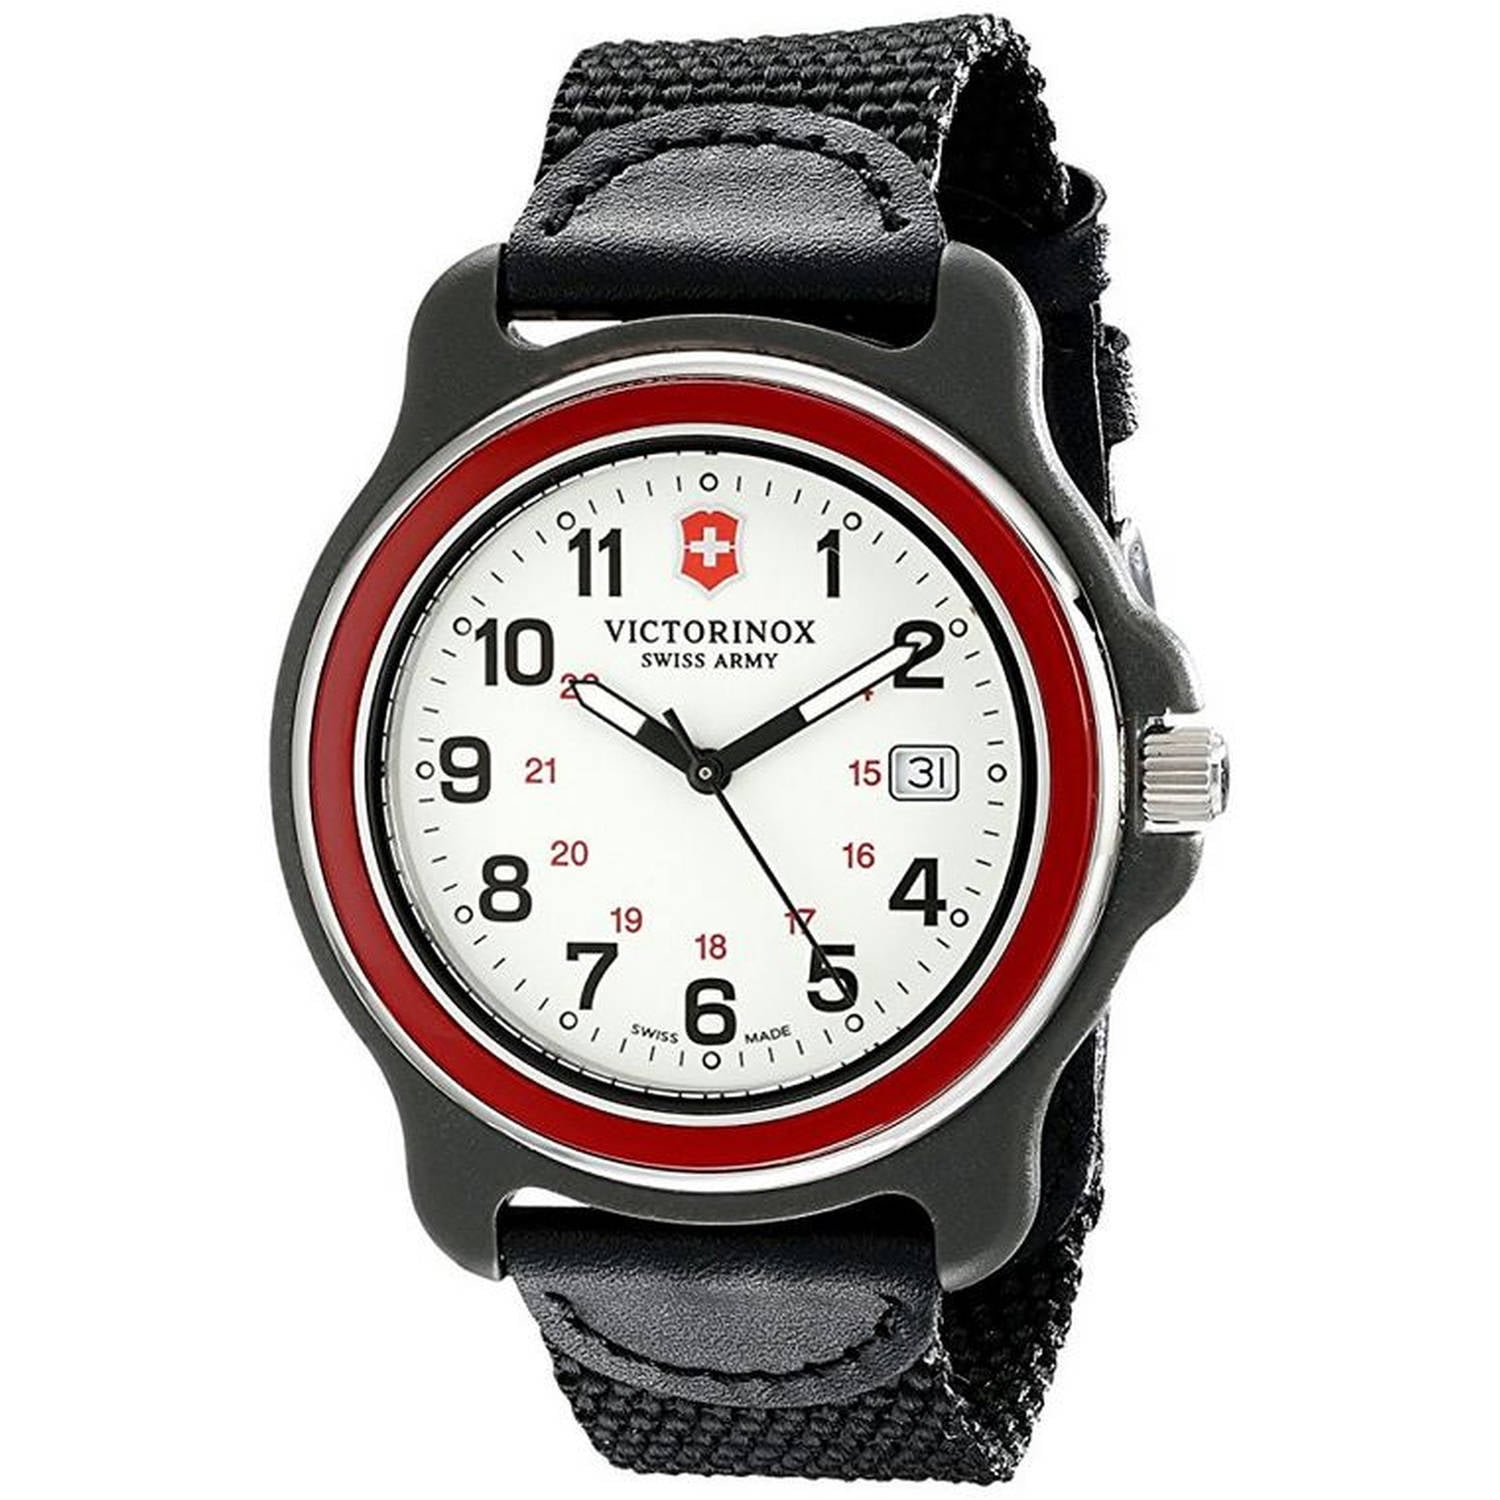 Mens Victorinox Swiss Army Watches - Army Military